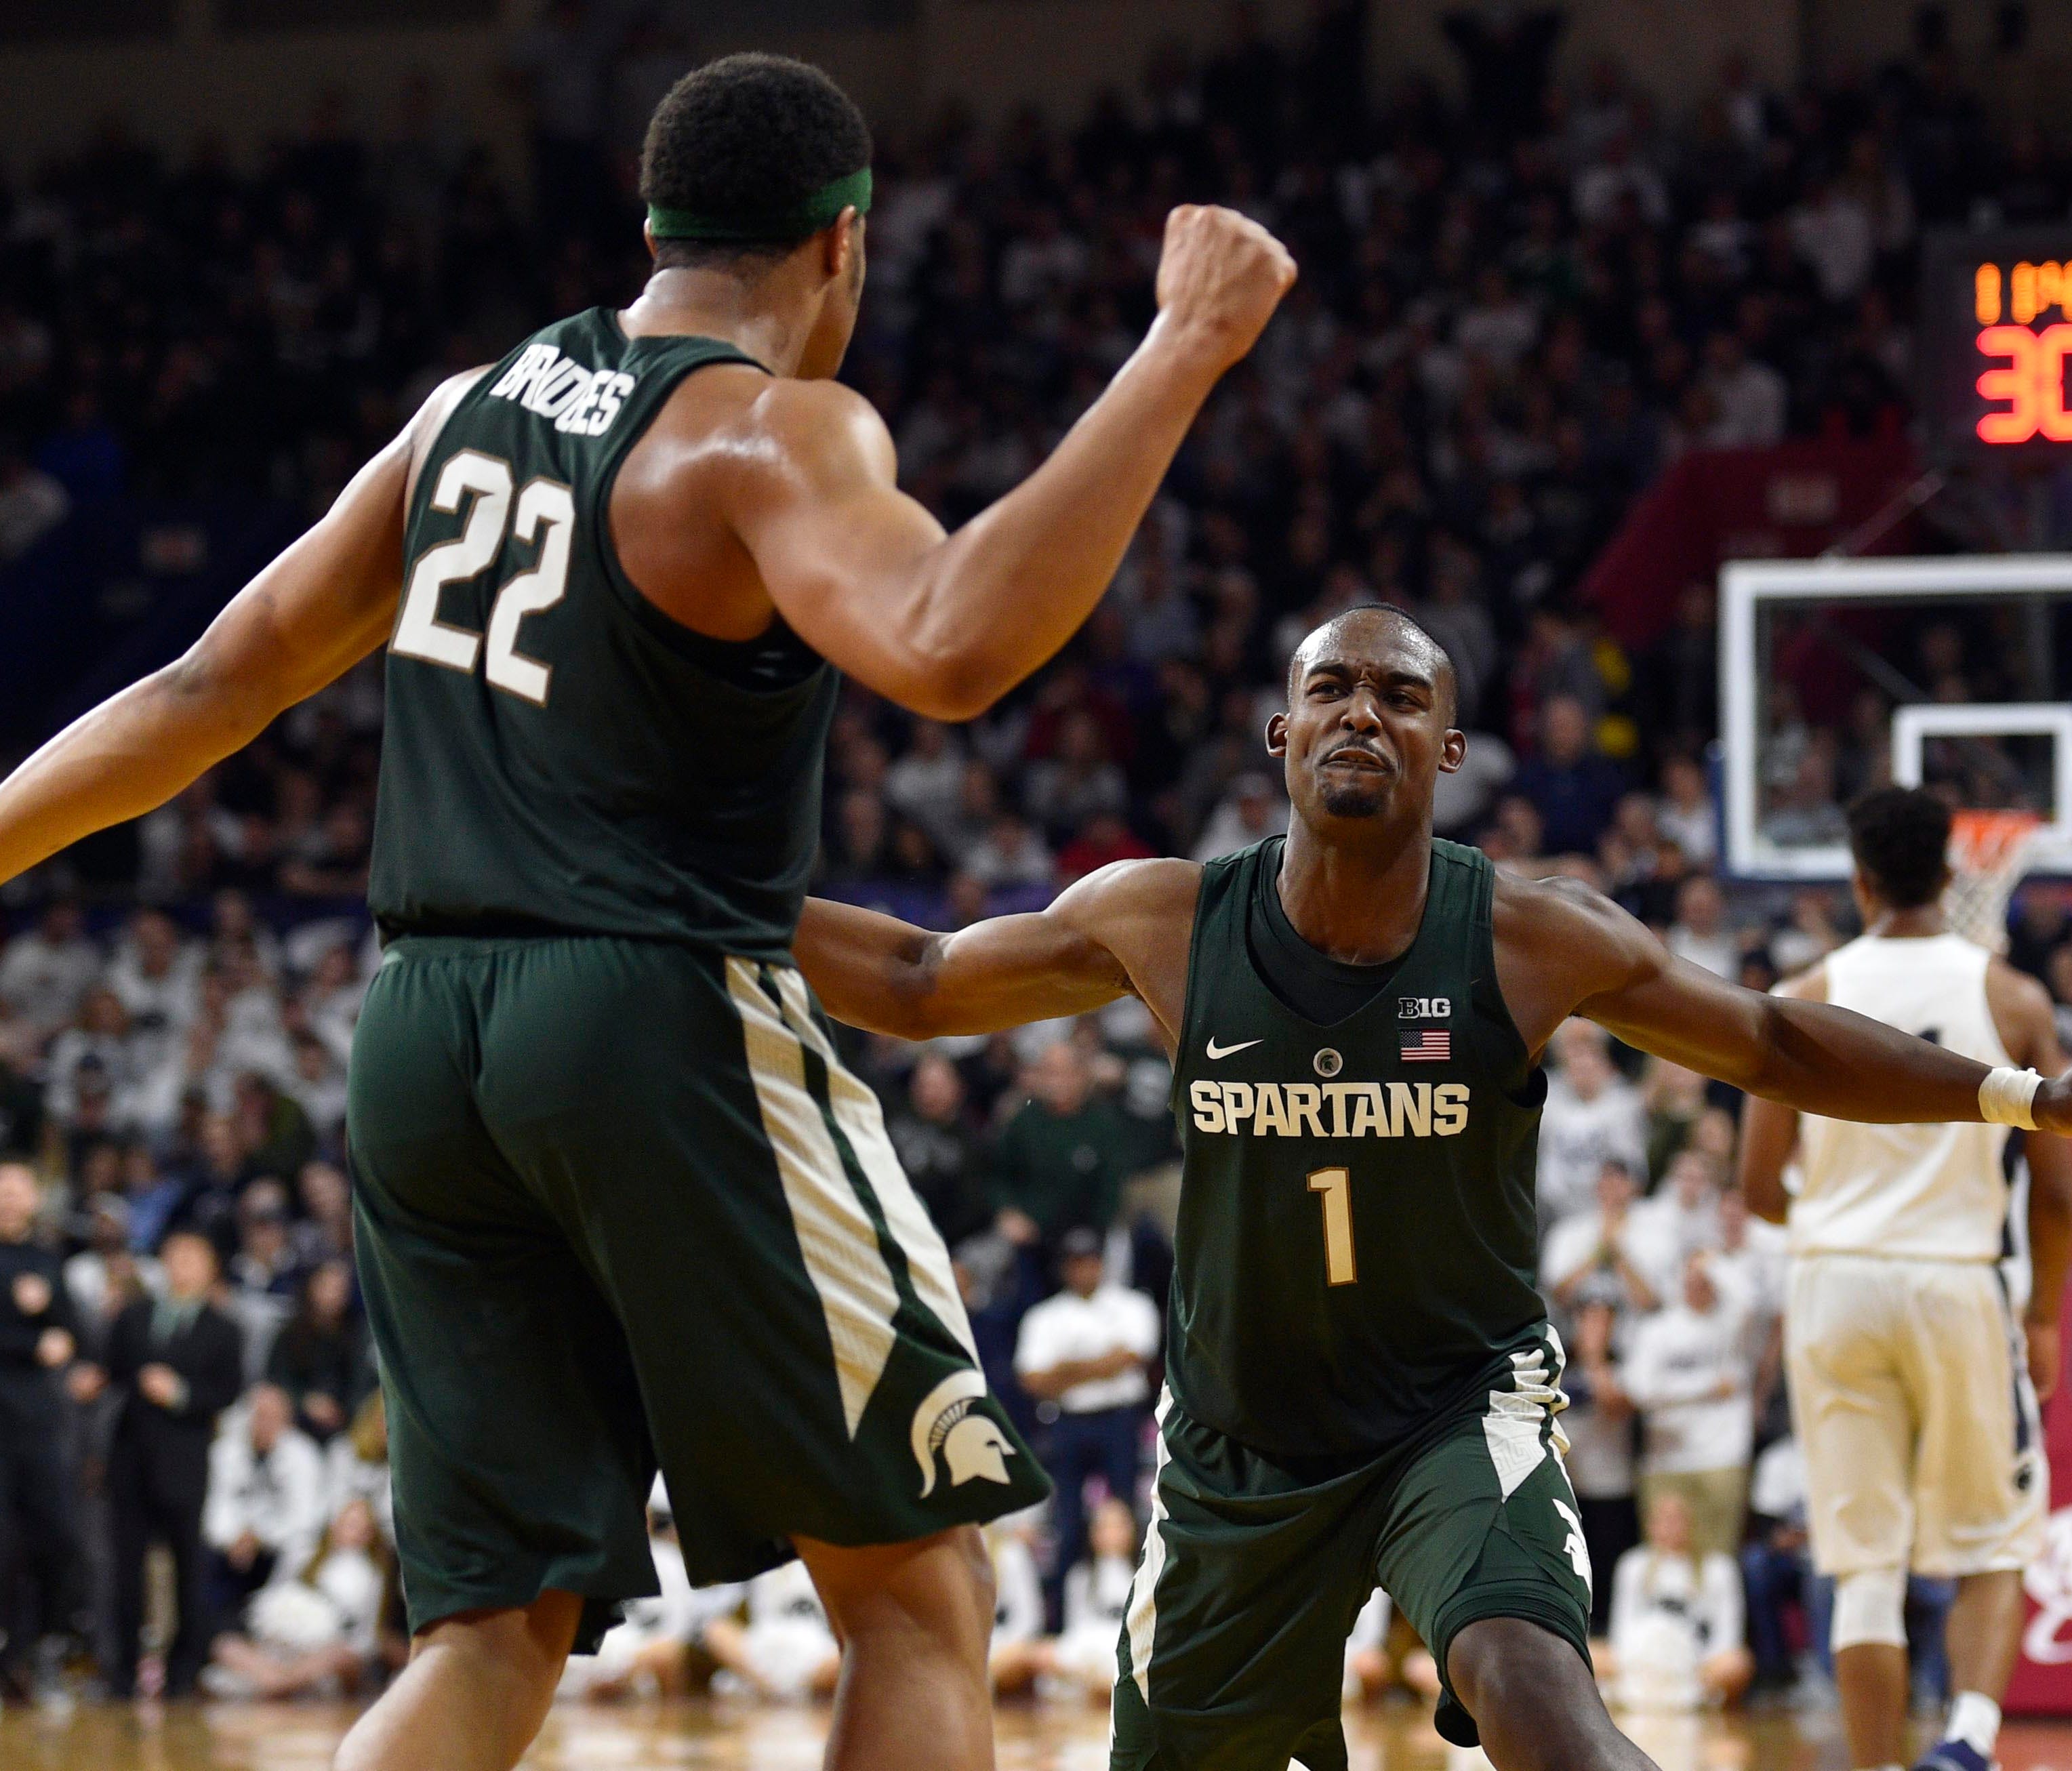 Michigan State Spartans guard Miles Bridges (22) celebrates a blocked shot with guard Joshua Langford (1) during the second half against the Penn State Nittany Lions at Palestra. Penn State won 72-63.